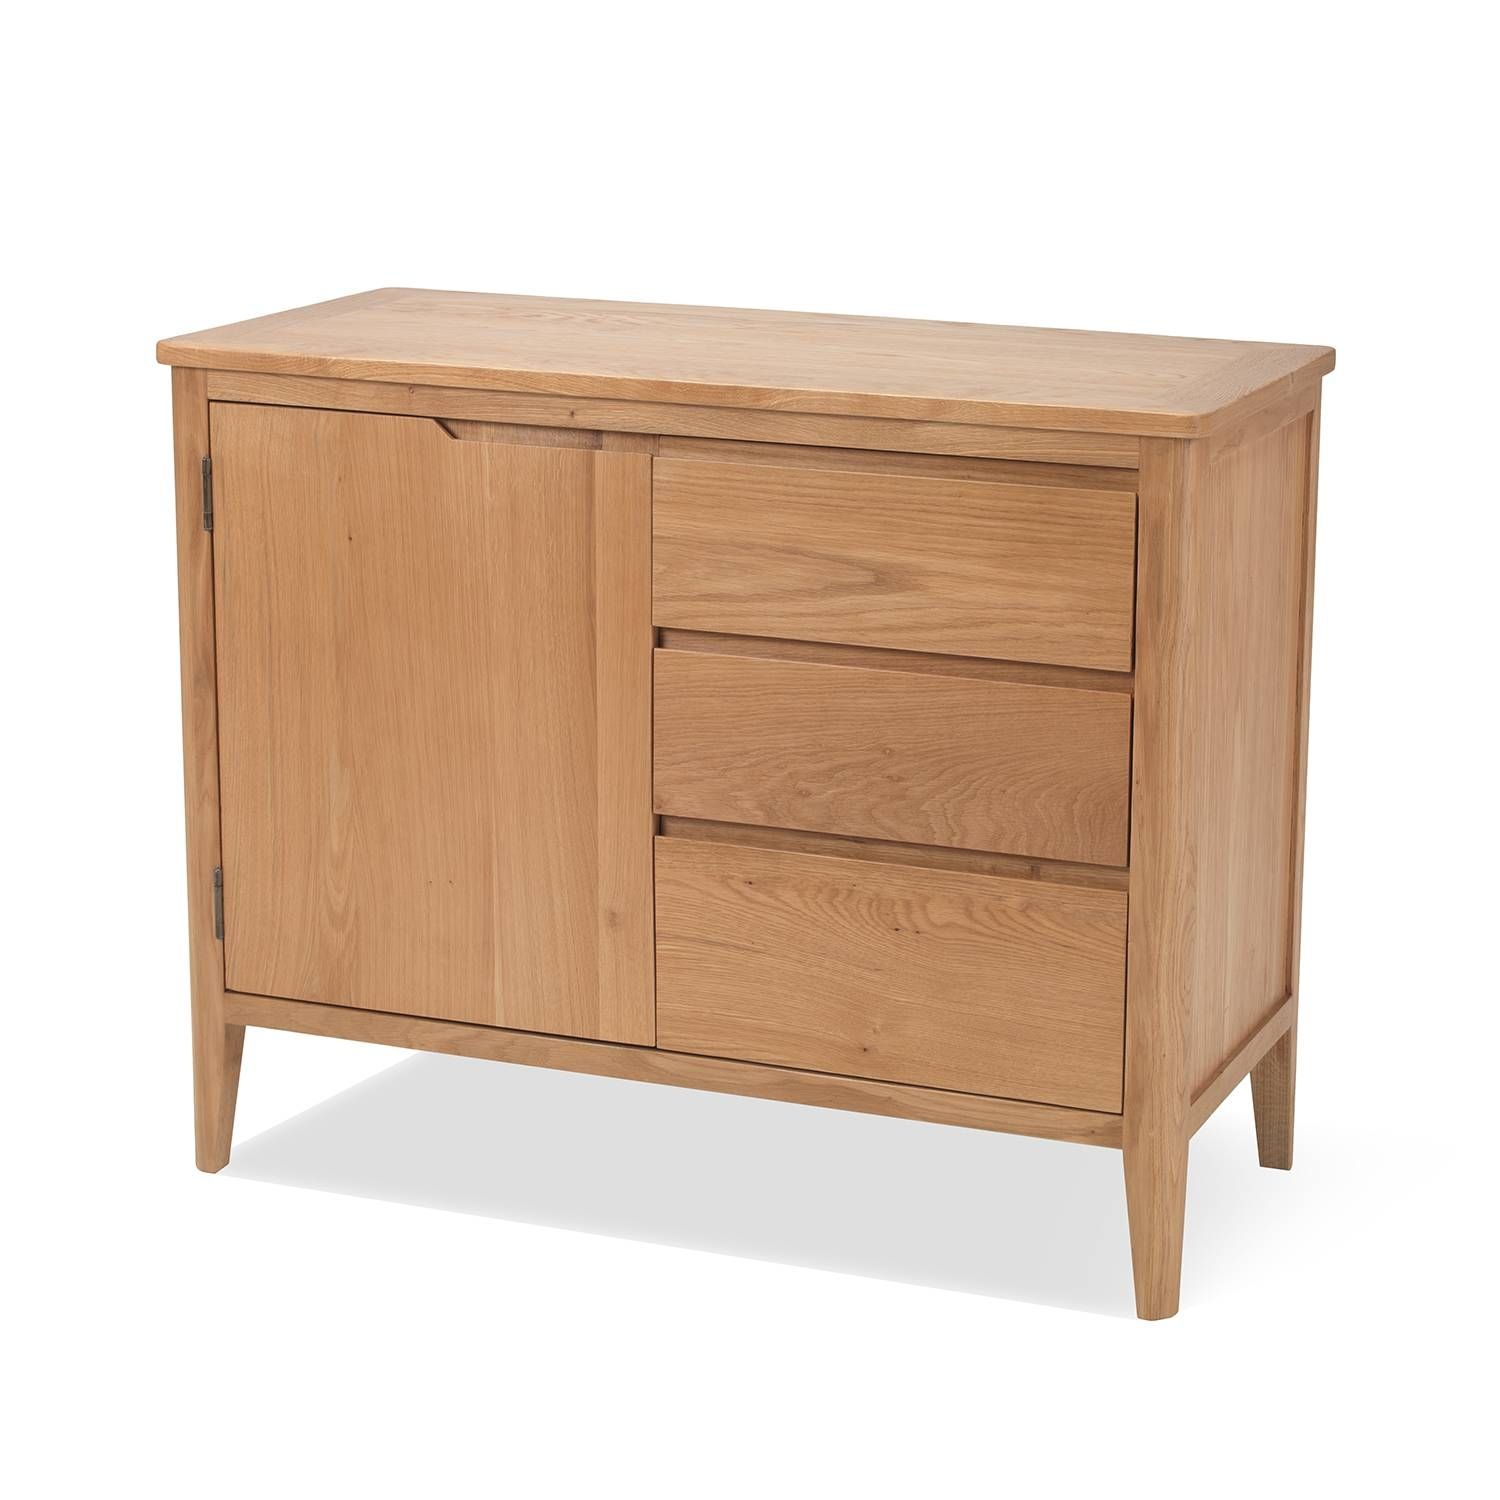 Oslo – Small Oak Sideboard / 1 Door 3 Drawer Storage Cupboard Unit With Regard To Small Sideboards With Drawers (Photo 3 of 15)